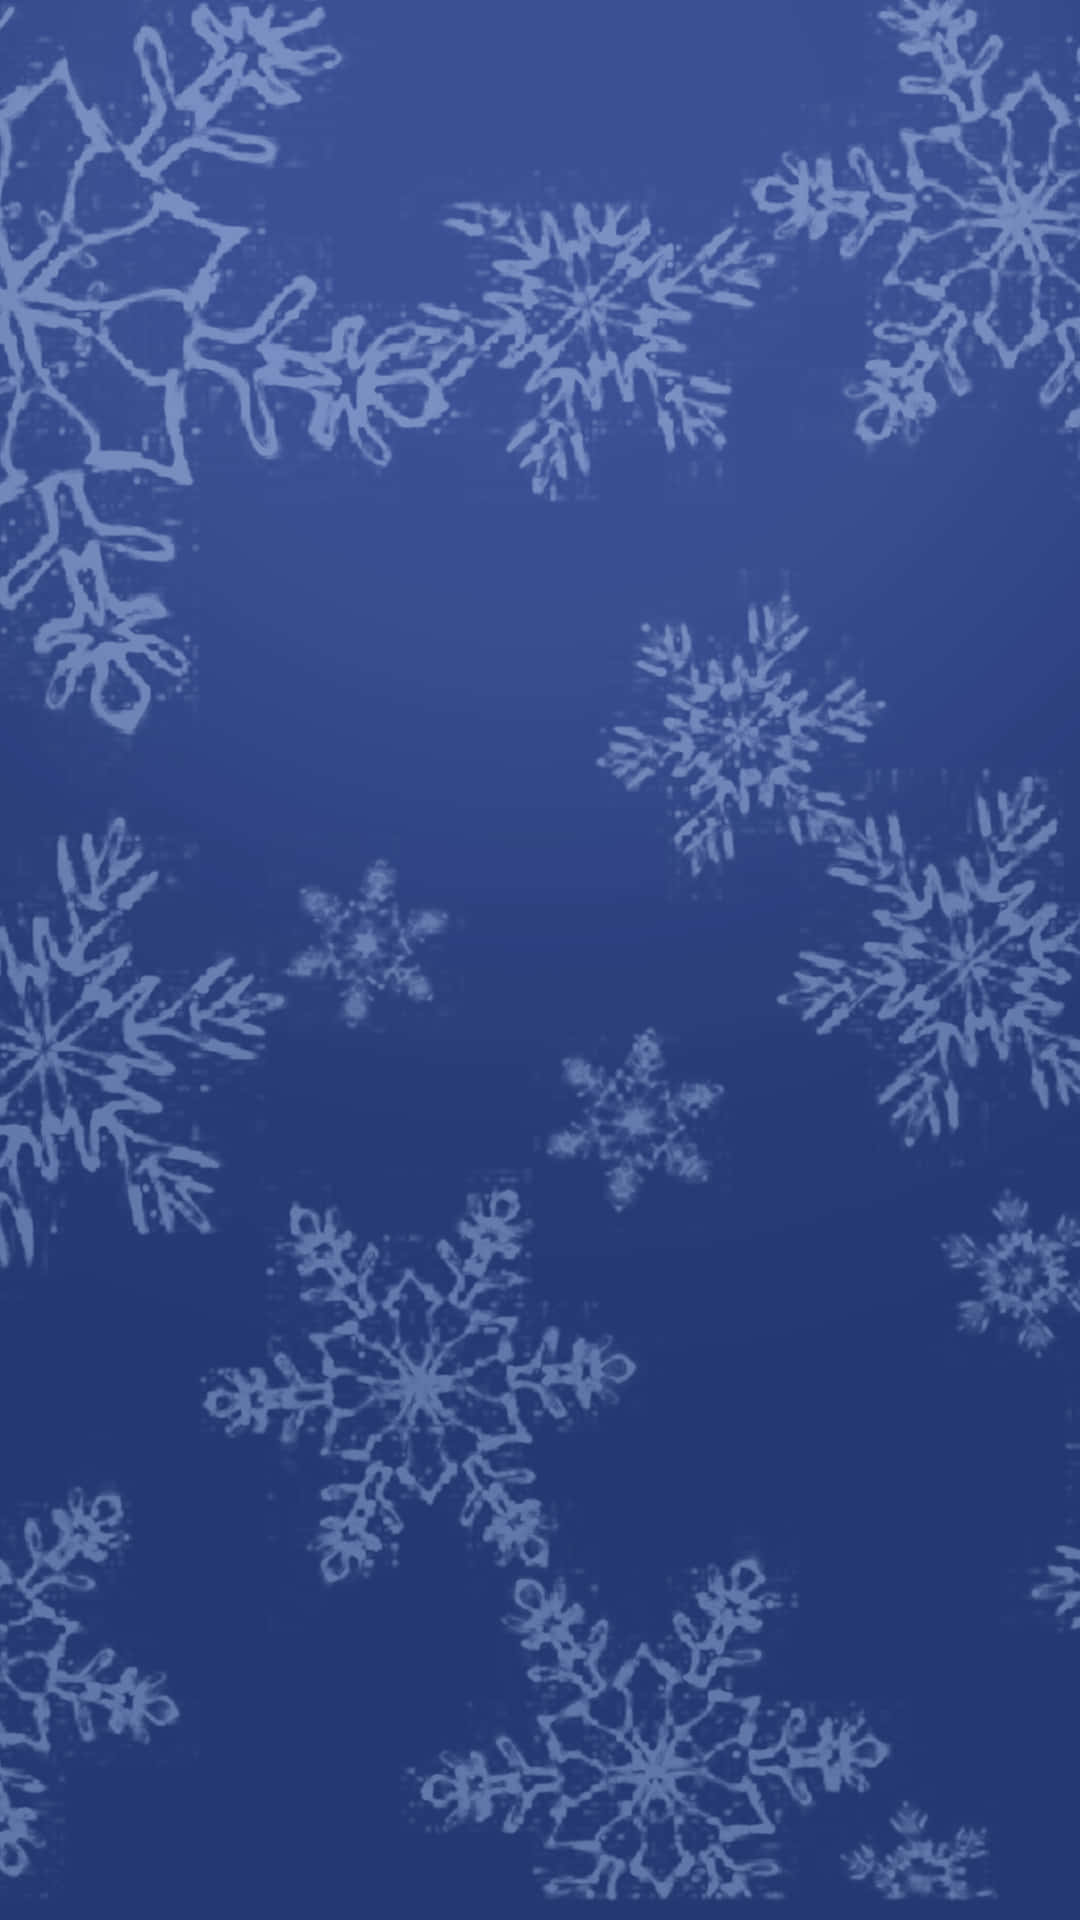 Festive Christmas Background With Ornaments And Snowflakes